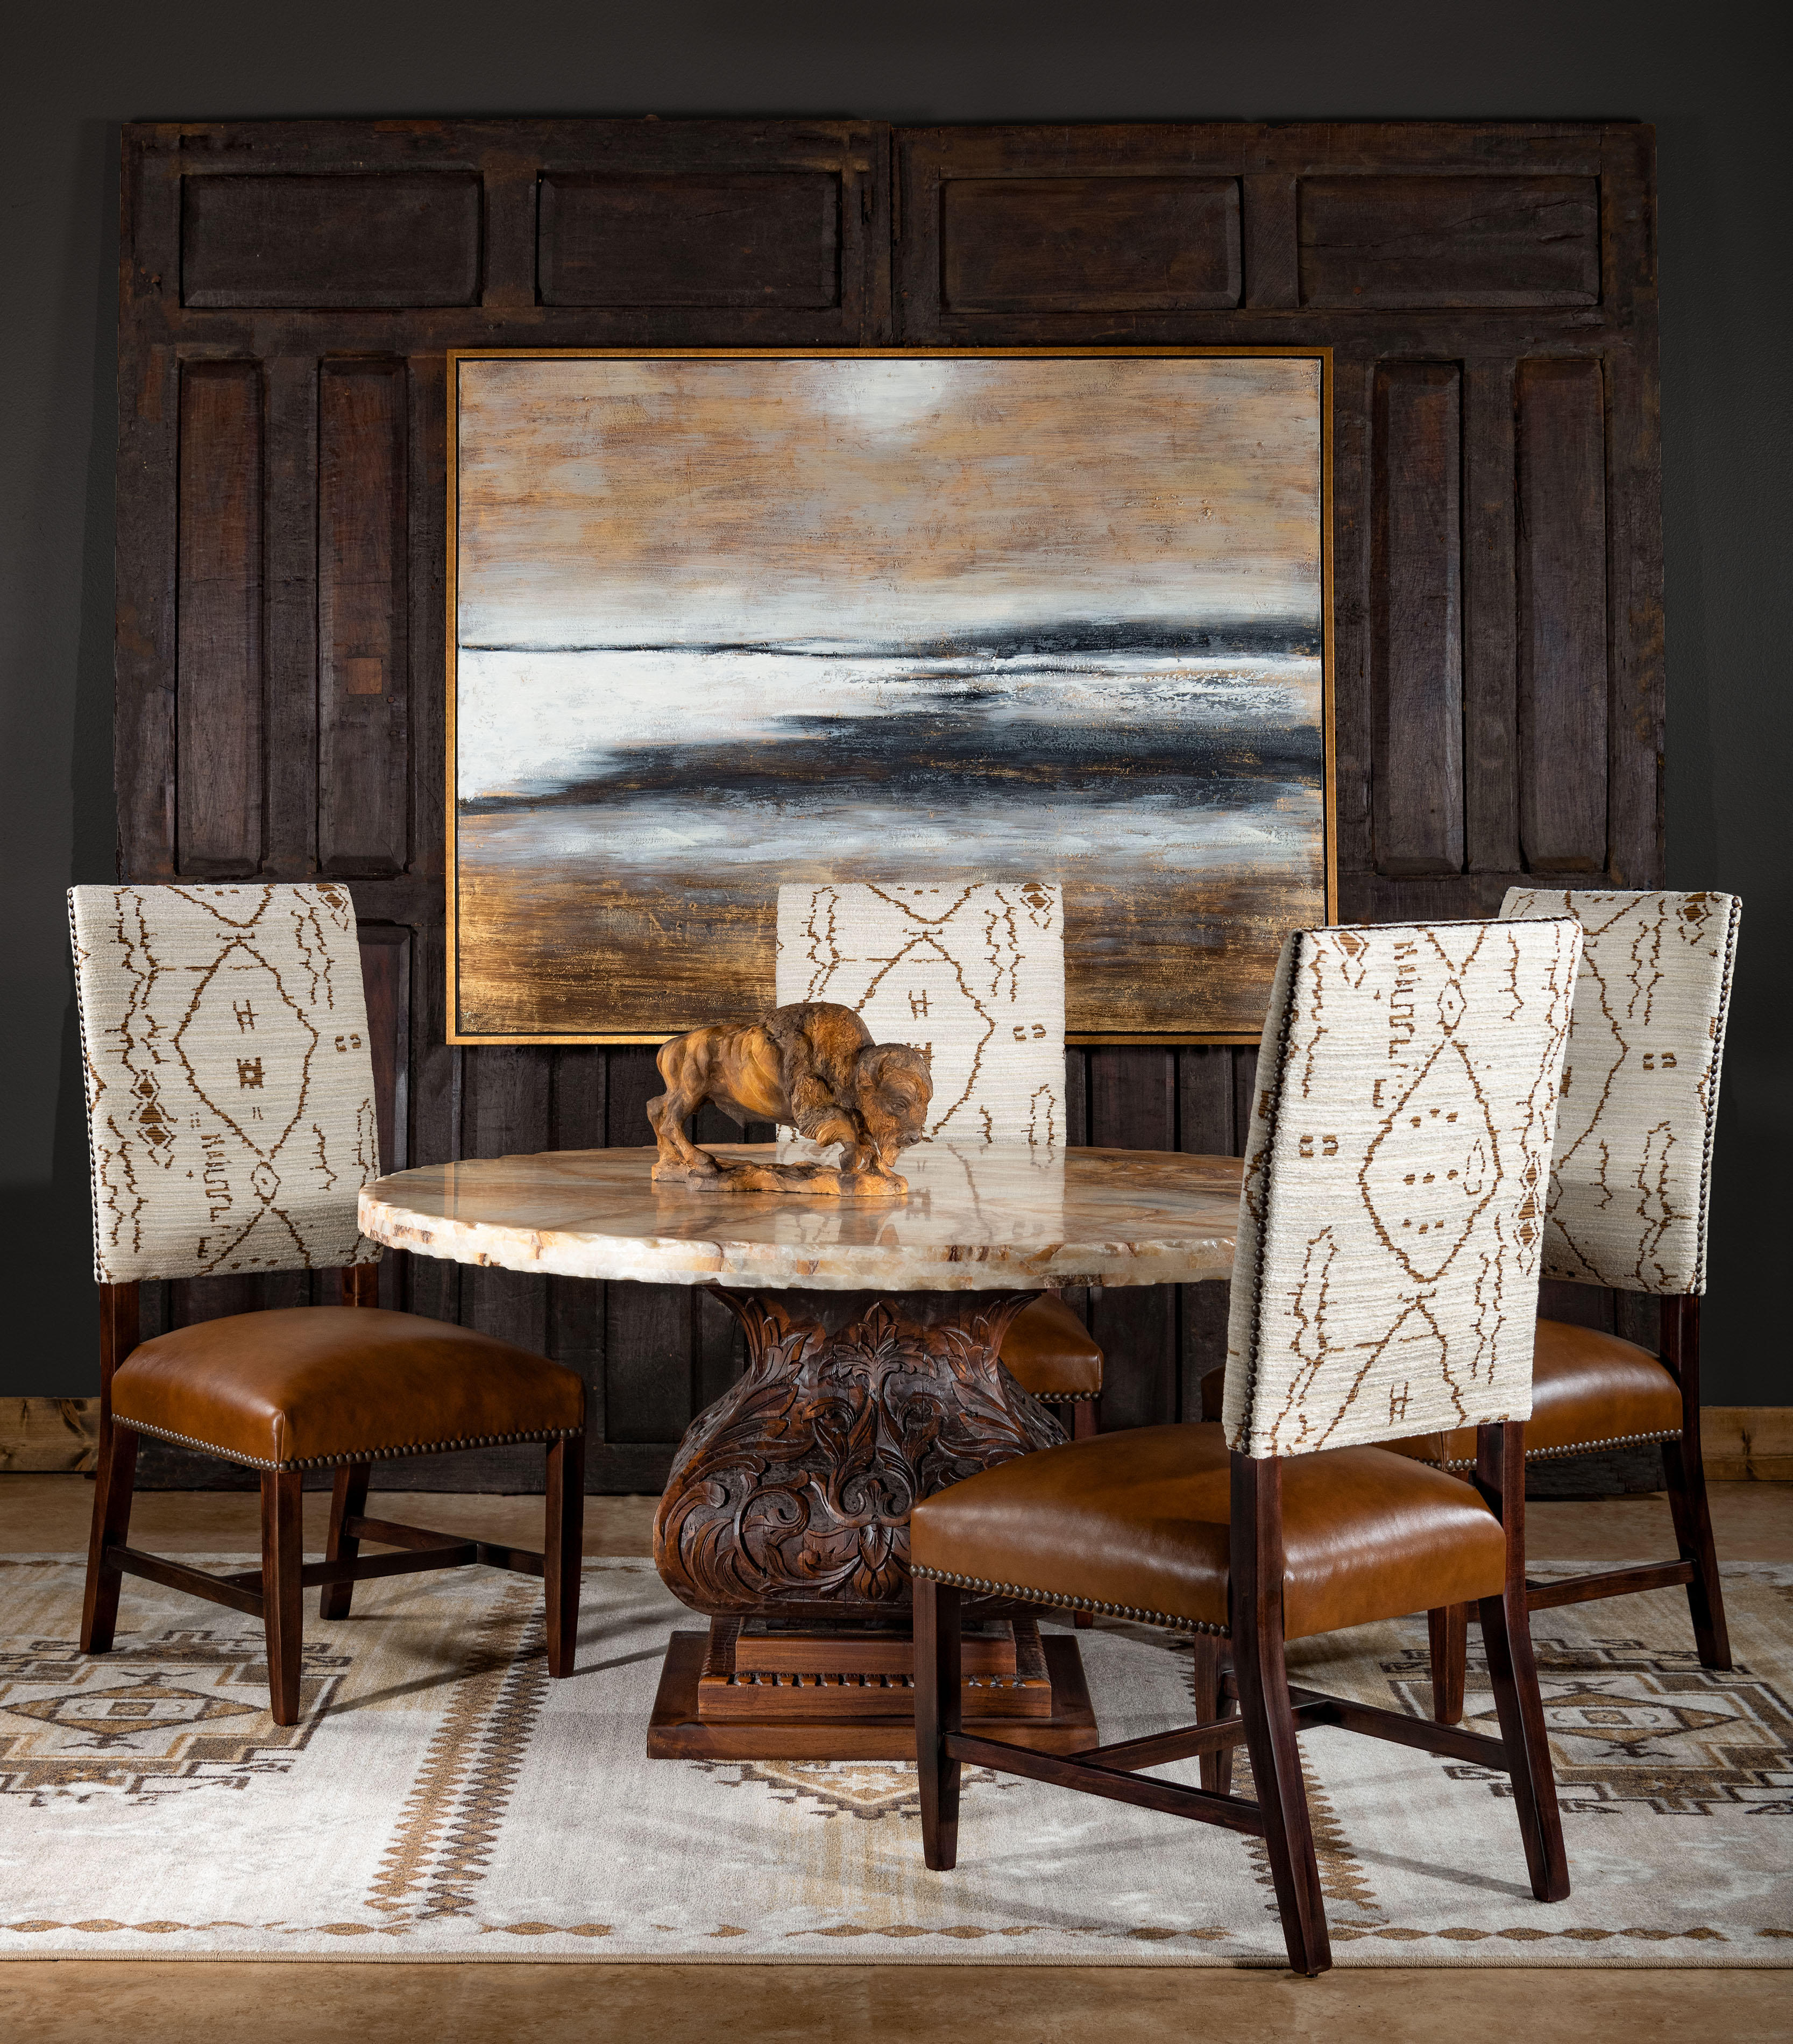 If you are searching for a luxurious modern southwestern dining chair that features a geometric, and modern inspired pattern, look no further than our Carlsbad Dining Chair. Using Poplar from the Appalachian Mountains for the frame and high-density premium cushioning on the seat and back cushion, this piece delivers the high-quality design and function that you expect from a piece of furniture that's meant to last. Eclectic influences combine for stunning results in this high-end dining chair. The seat back sports a clean, bold pattern that is as chic as it is rustic elegant. The high quality top grain leather seat cushion has a subtle distressed look, putting your guests at ease while still appearing impeccably polished. This tasteful dining room chair is truly ideal for any meal or occasion, from a small, intimate gathering to a bustling party. 100% American Made!